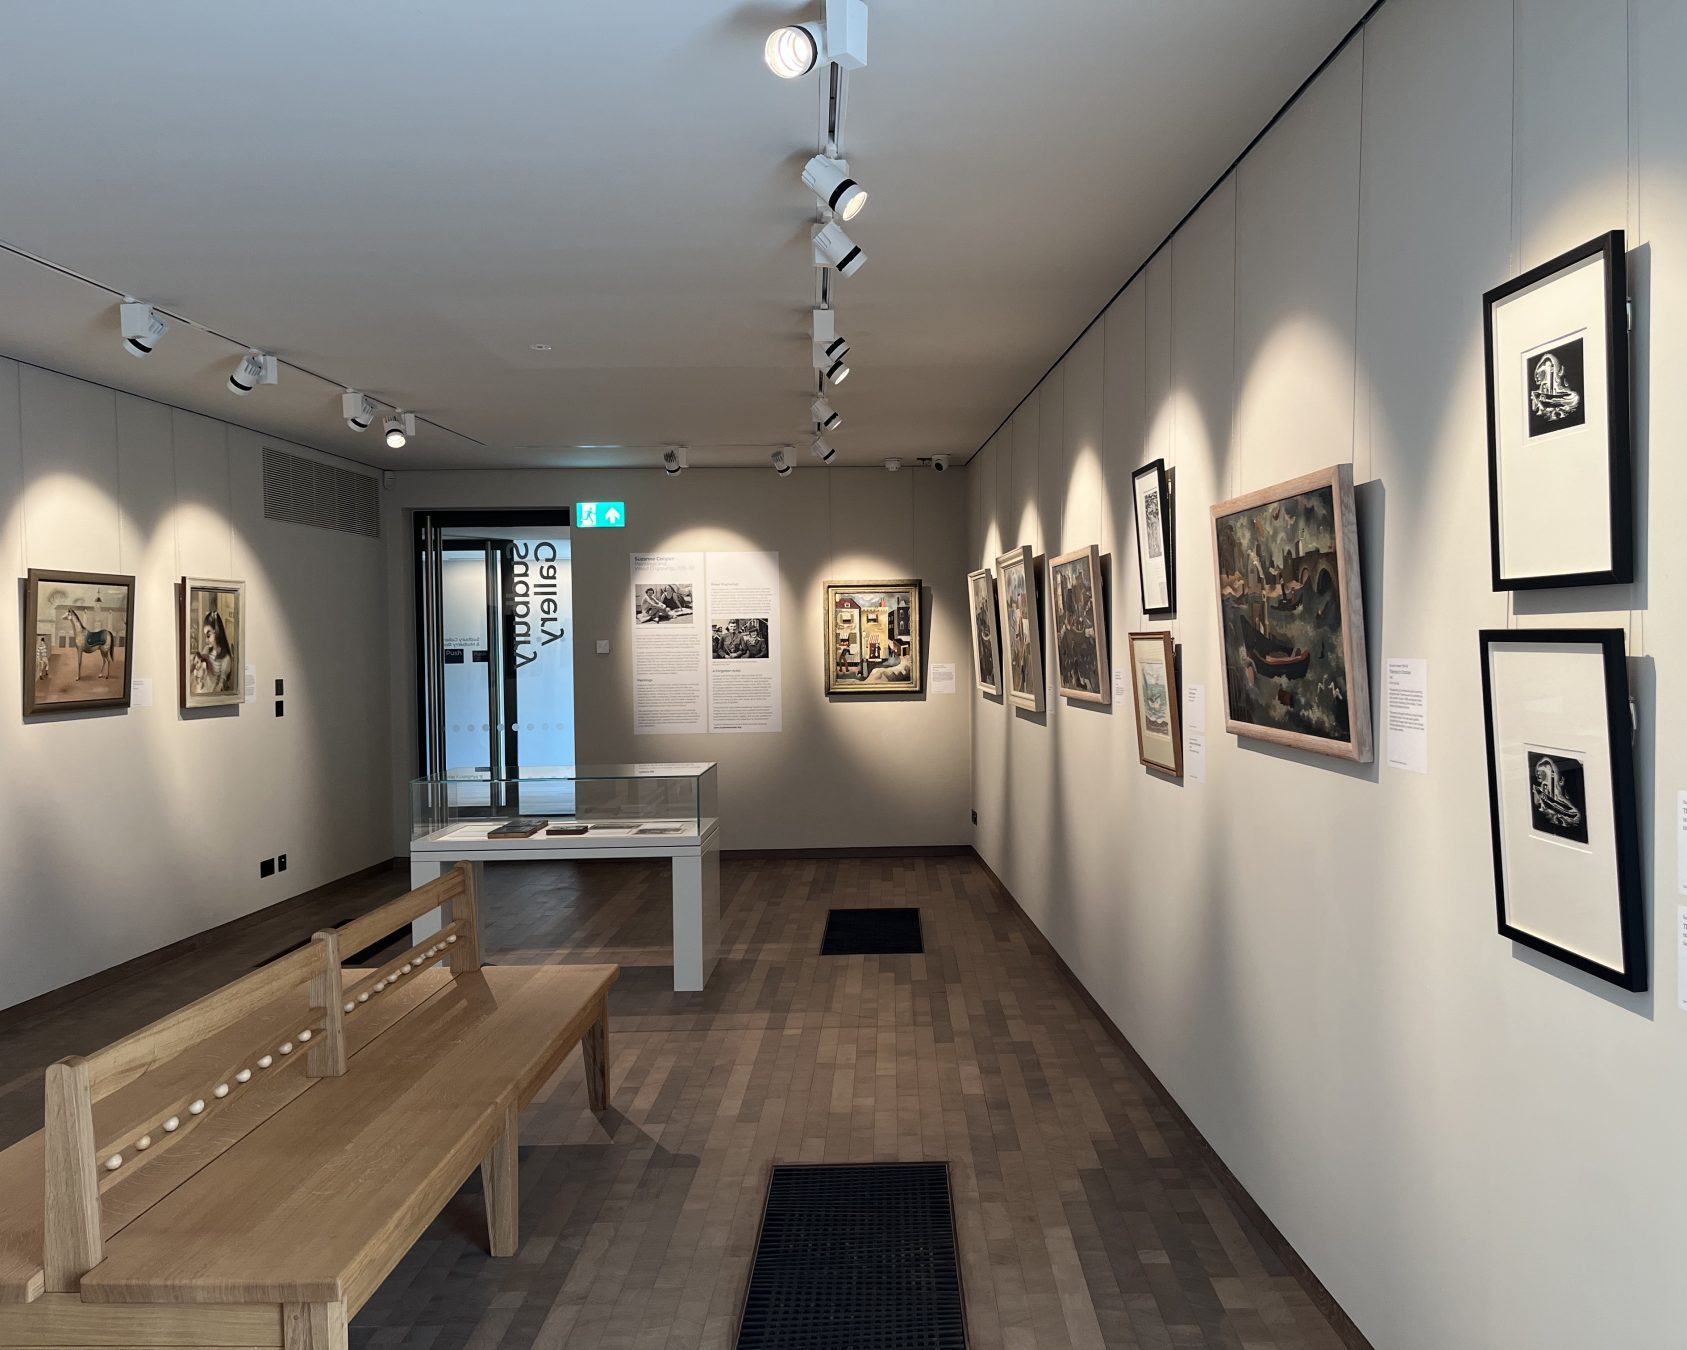 An image taken in the Sudbury Gallery at Gainsborough's House. The exhibition is 'Suzanne Cooper: Paintings and Wood Engravings, 1935–39'. There are various pieces of artwork on display on walls and in cabinets.